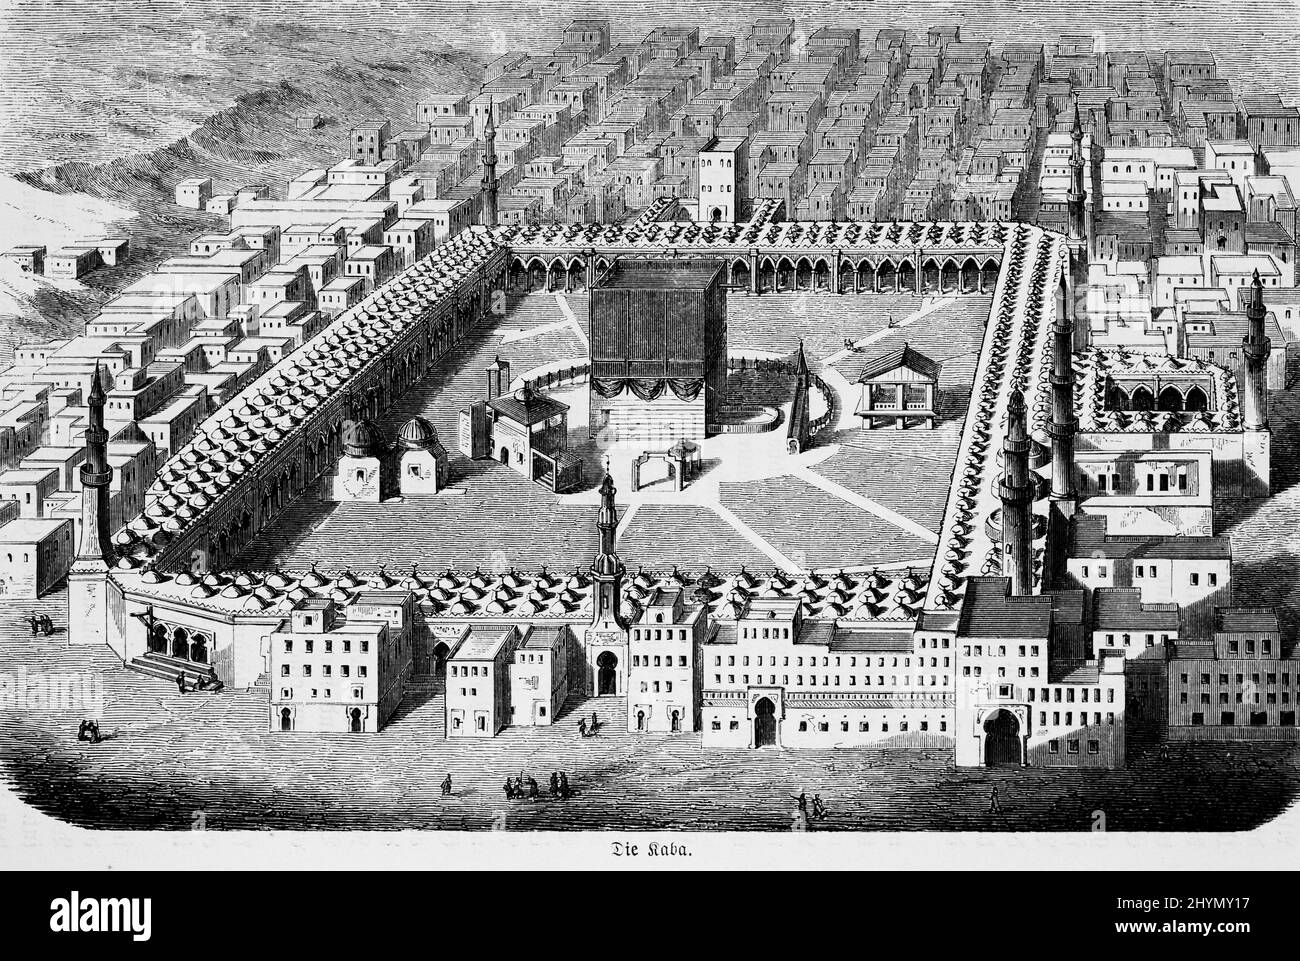 City view, from above, Kaaba, sanctuary, mosque, square, Prophet Mohammed, pilgrimage site, Islam, historical illustration 1885, Mecca, Saudi Arabia Stock Photo